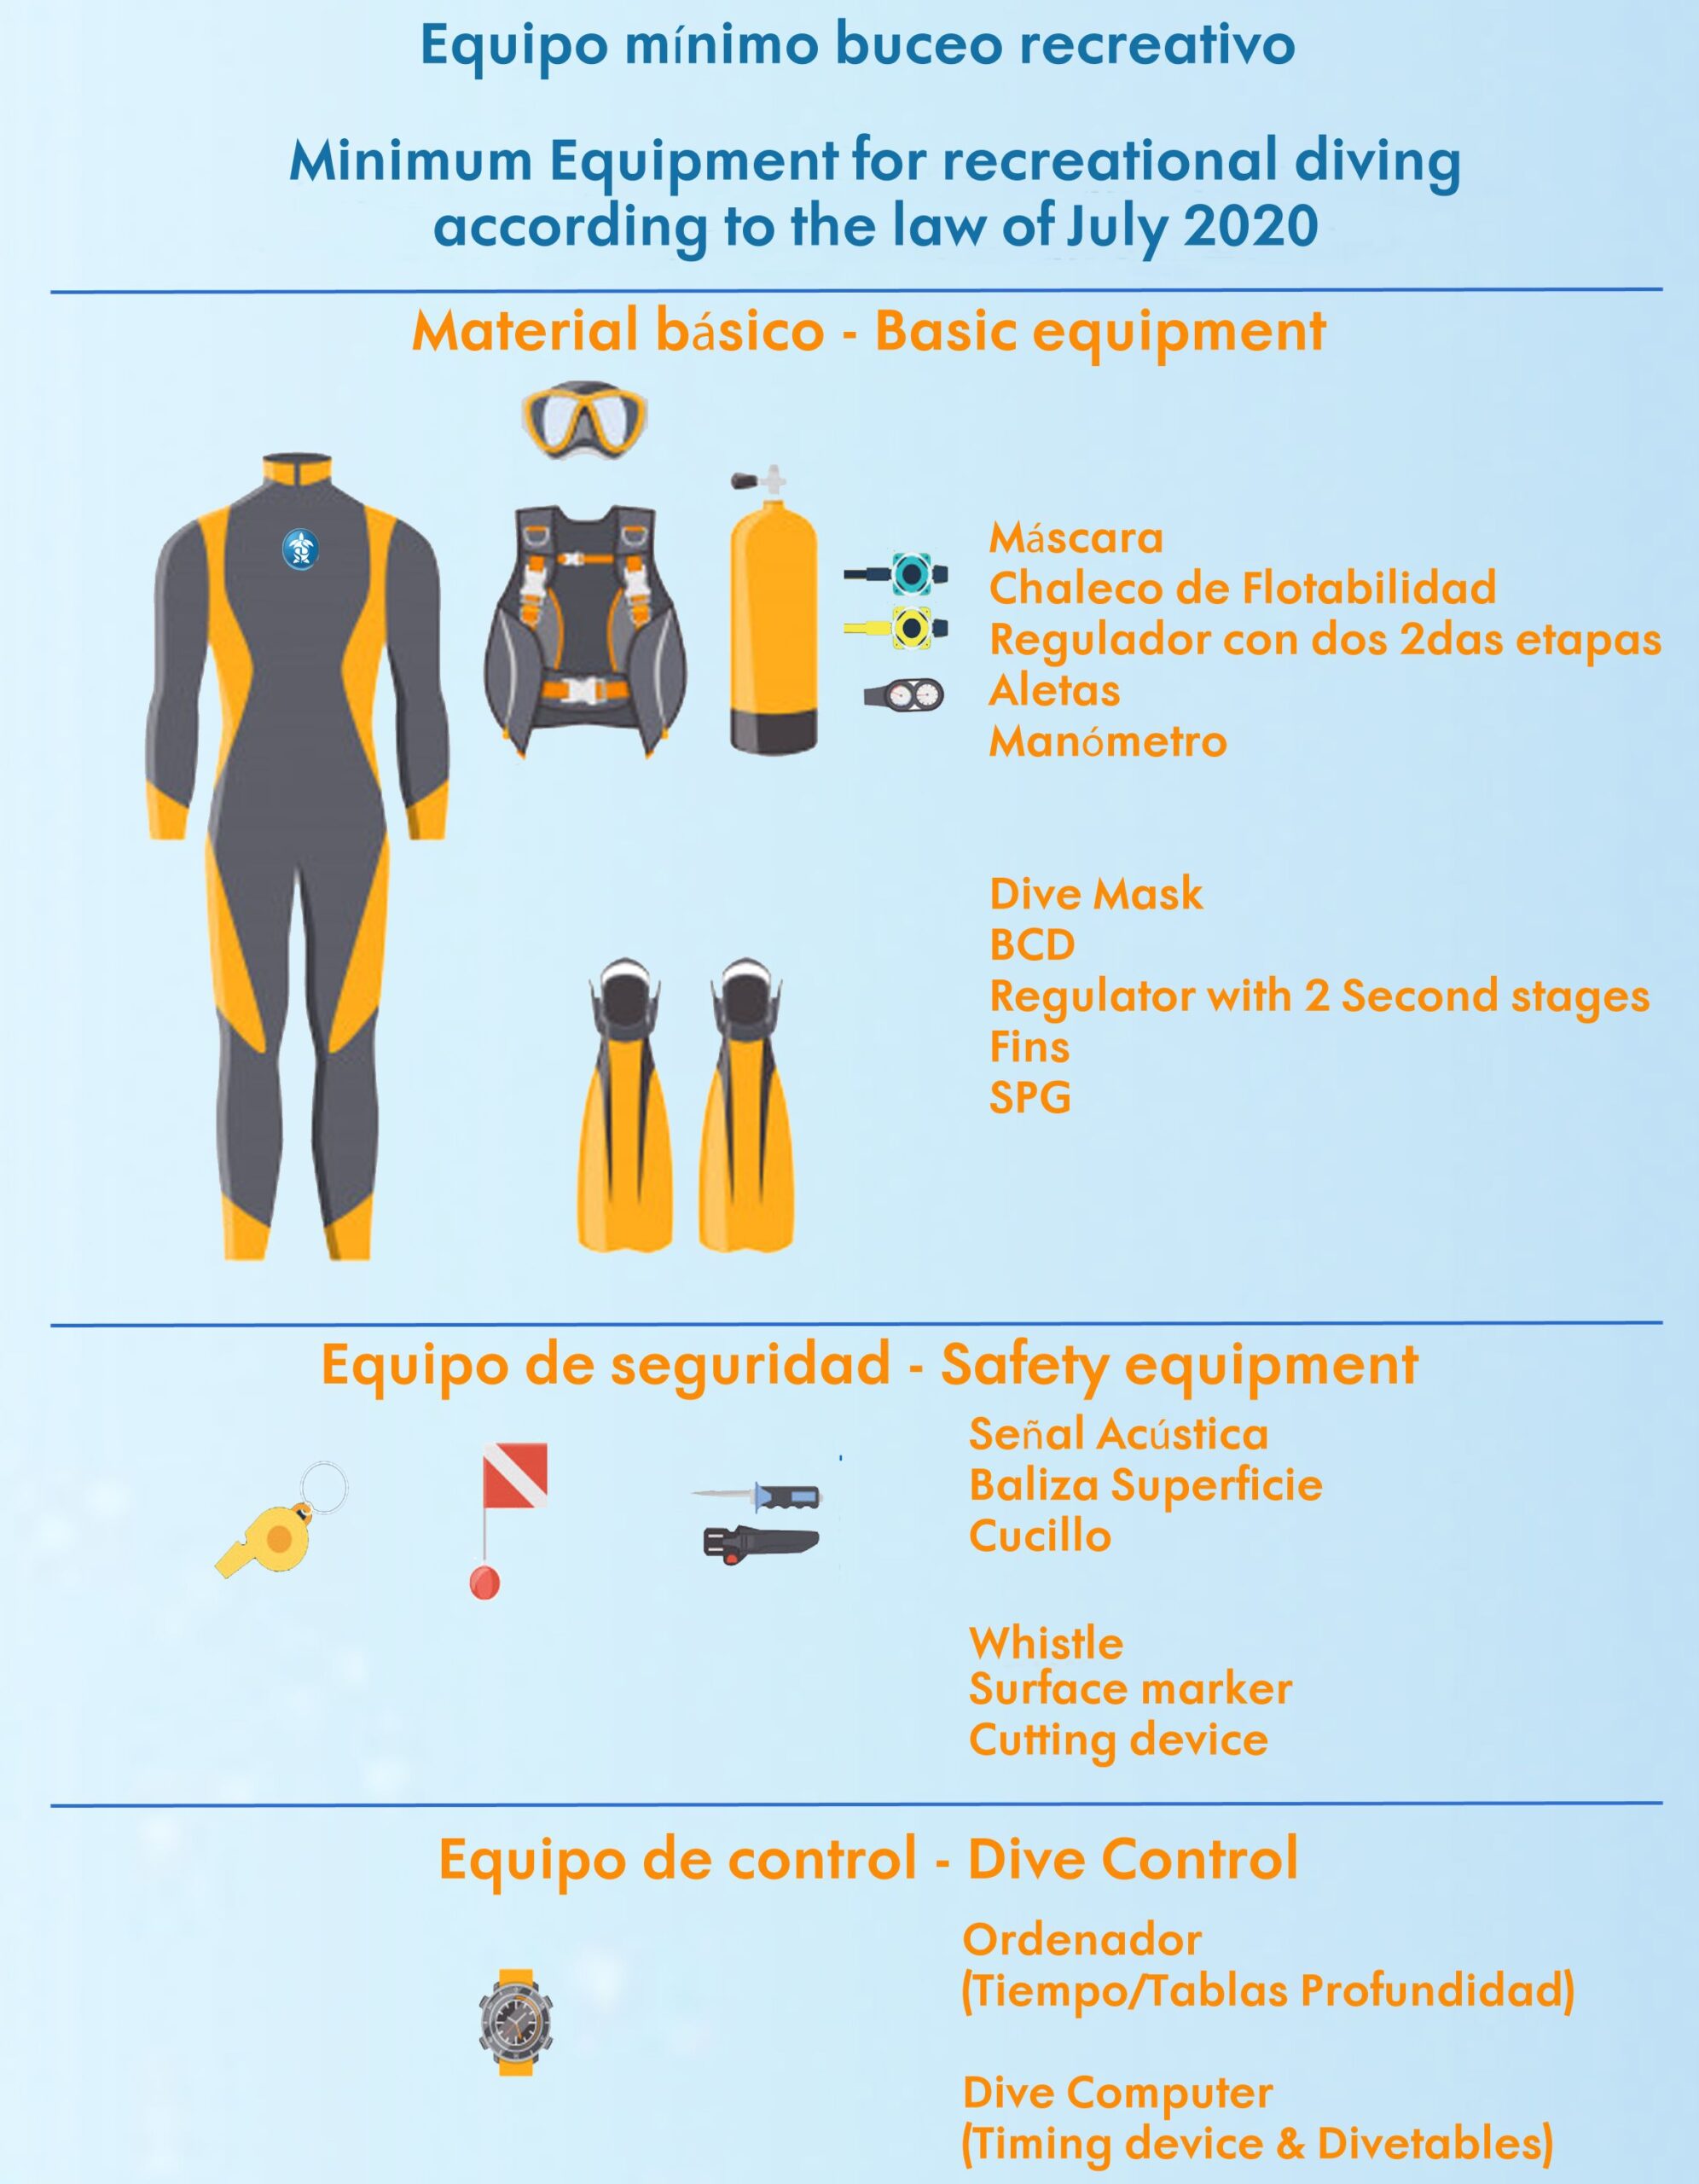 Canarian rules for recreational diving